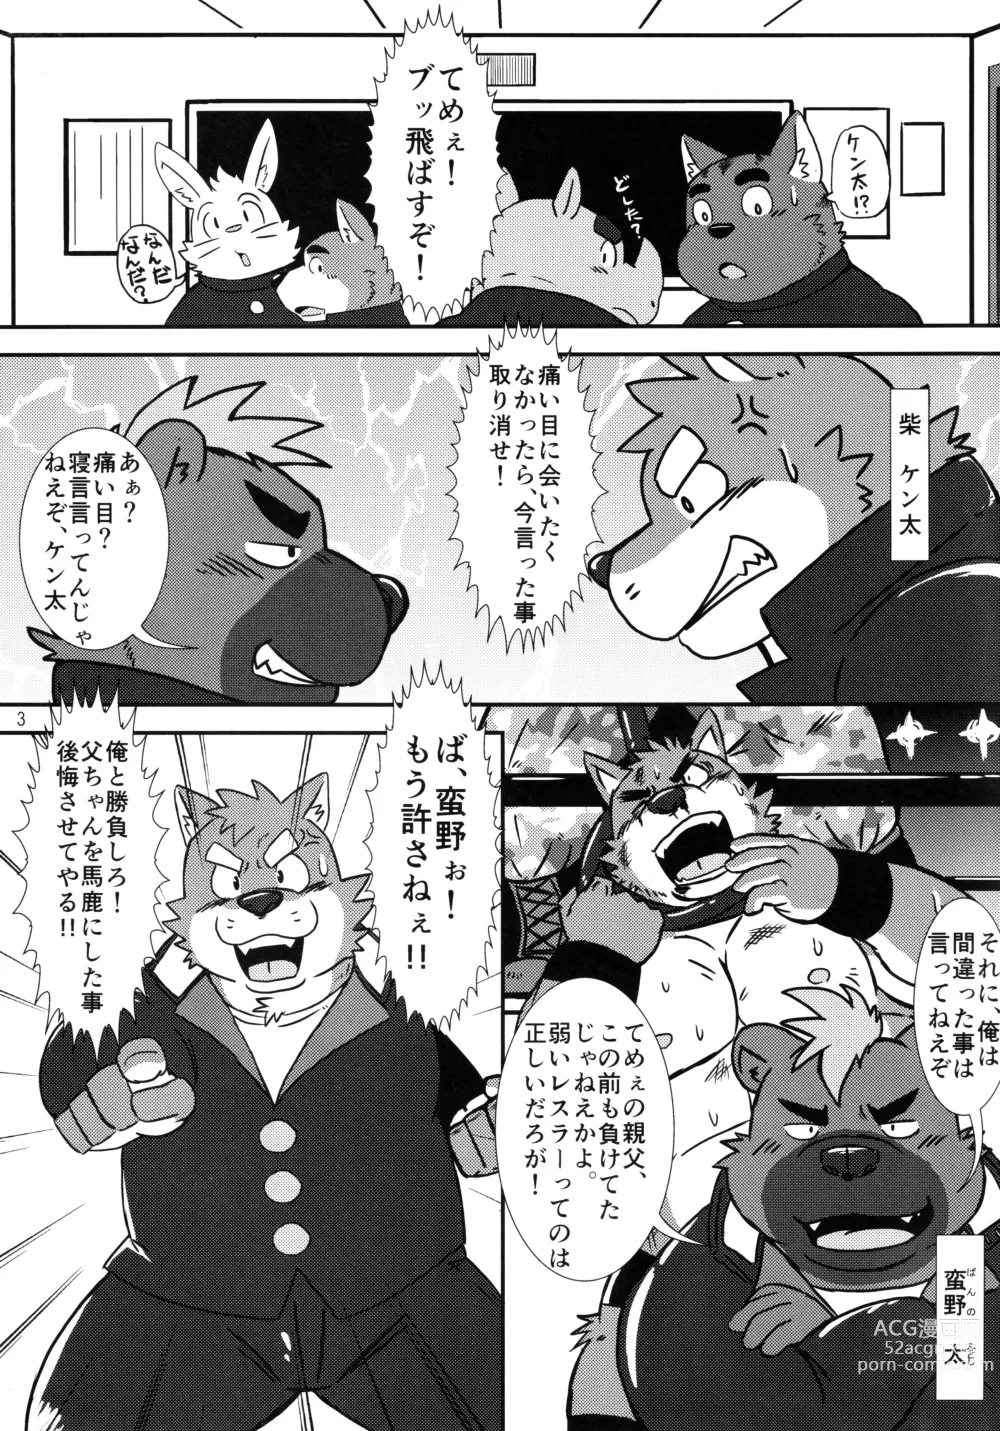 Page 4 of doujinshi BFW -BEAST FIGHTER WRESTLING-